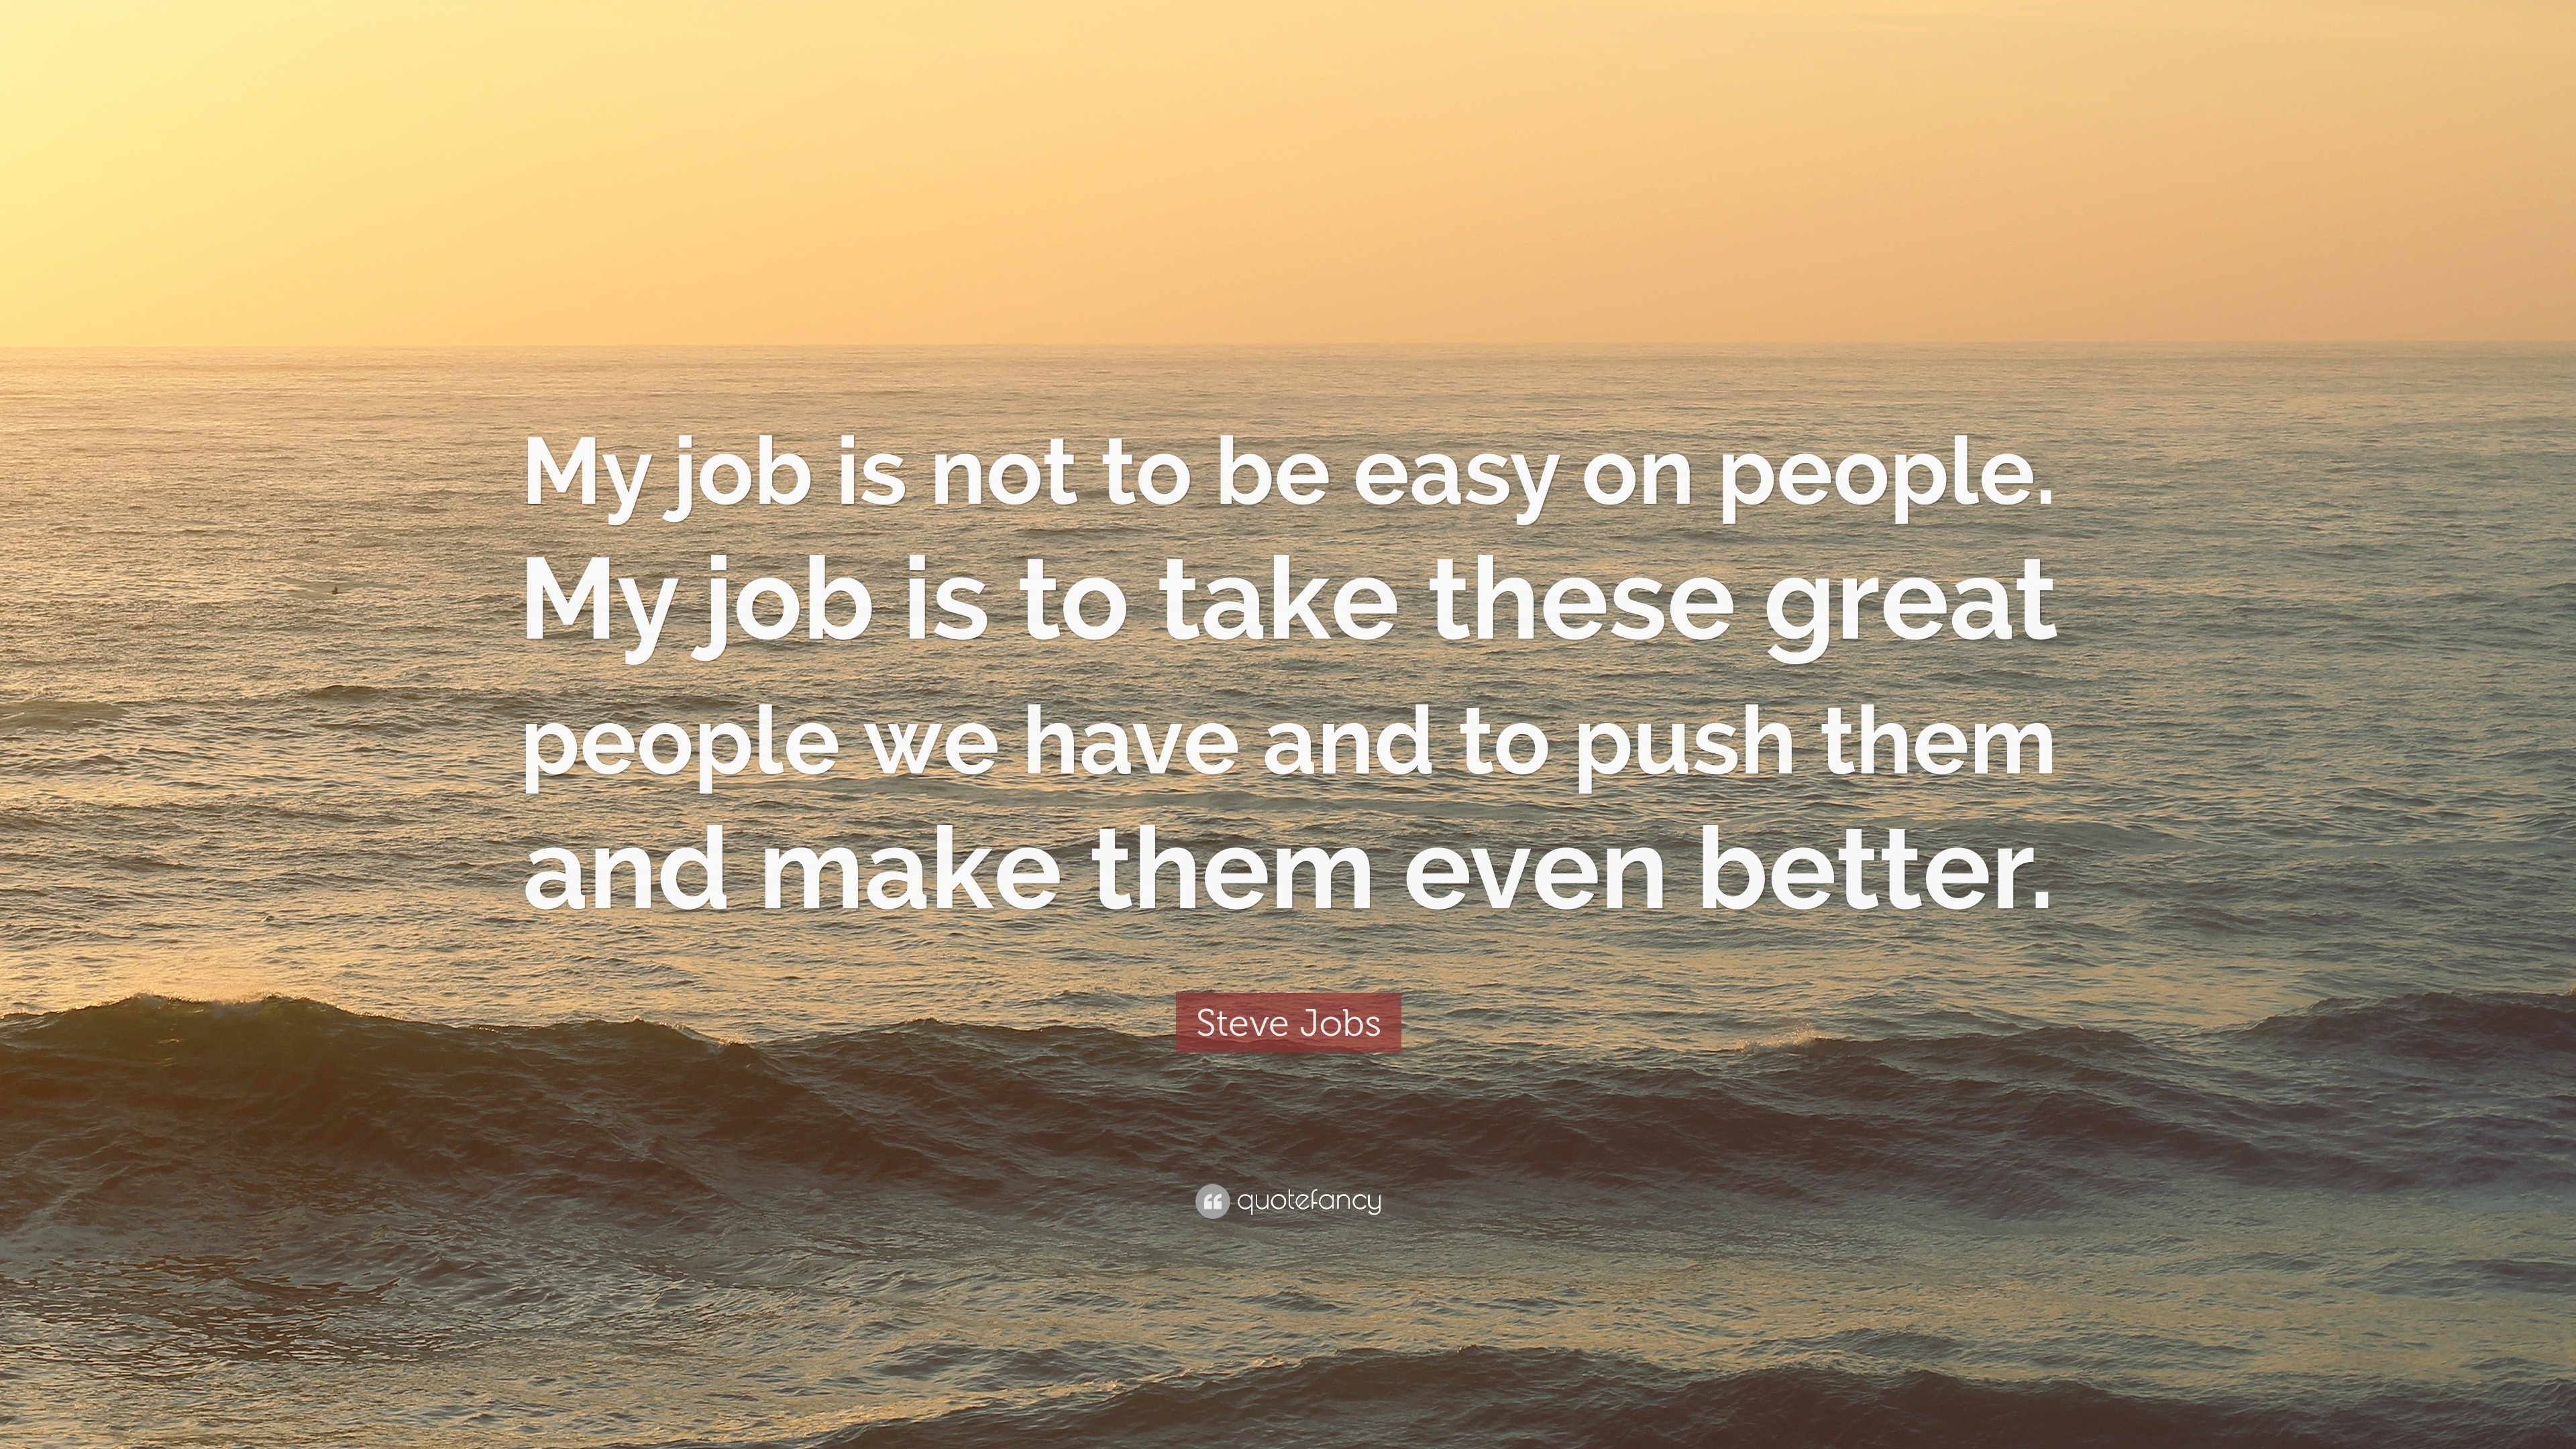 Steve Jobs Quote: “My job is not to be easy on people. My job is to